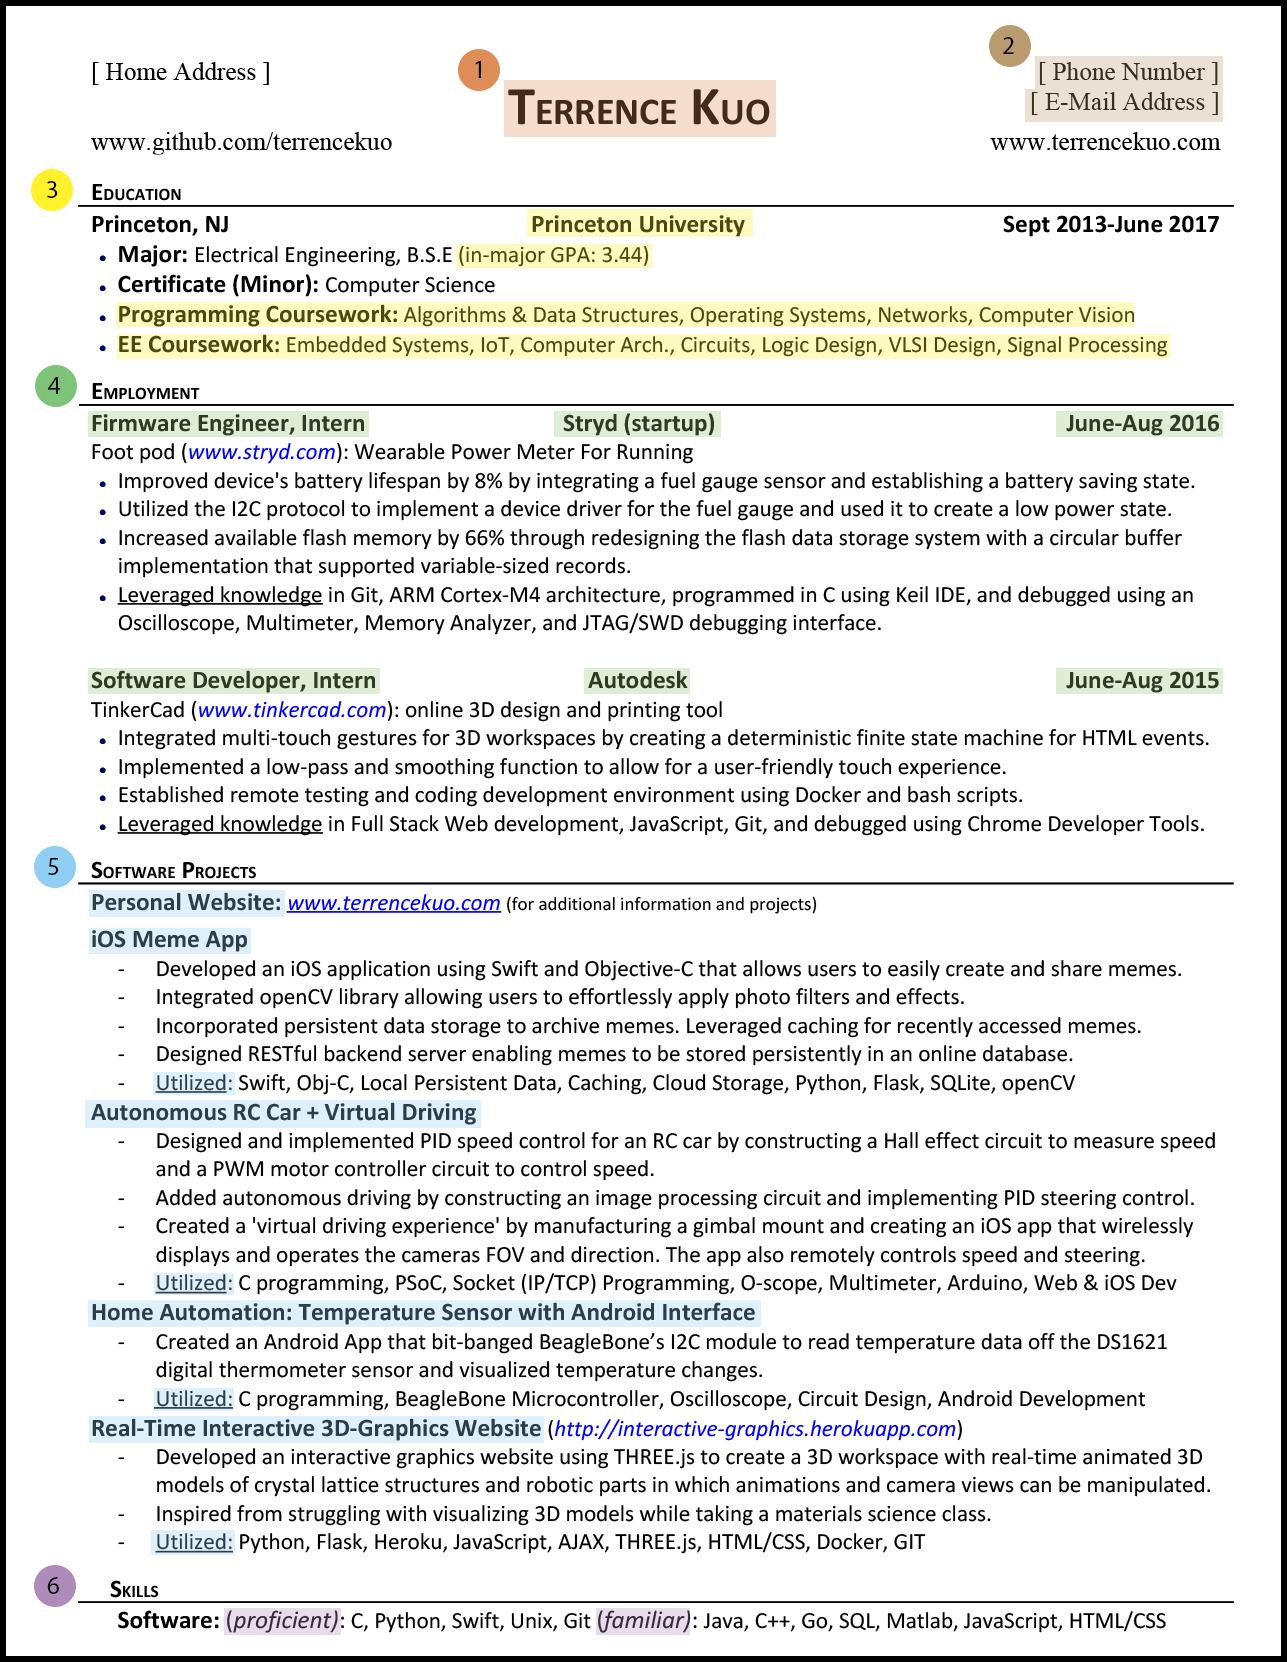 Resume Samples for Experienced software Professionals How to Write A Killer software Engineering RÃ©sumÃ©